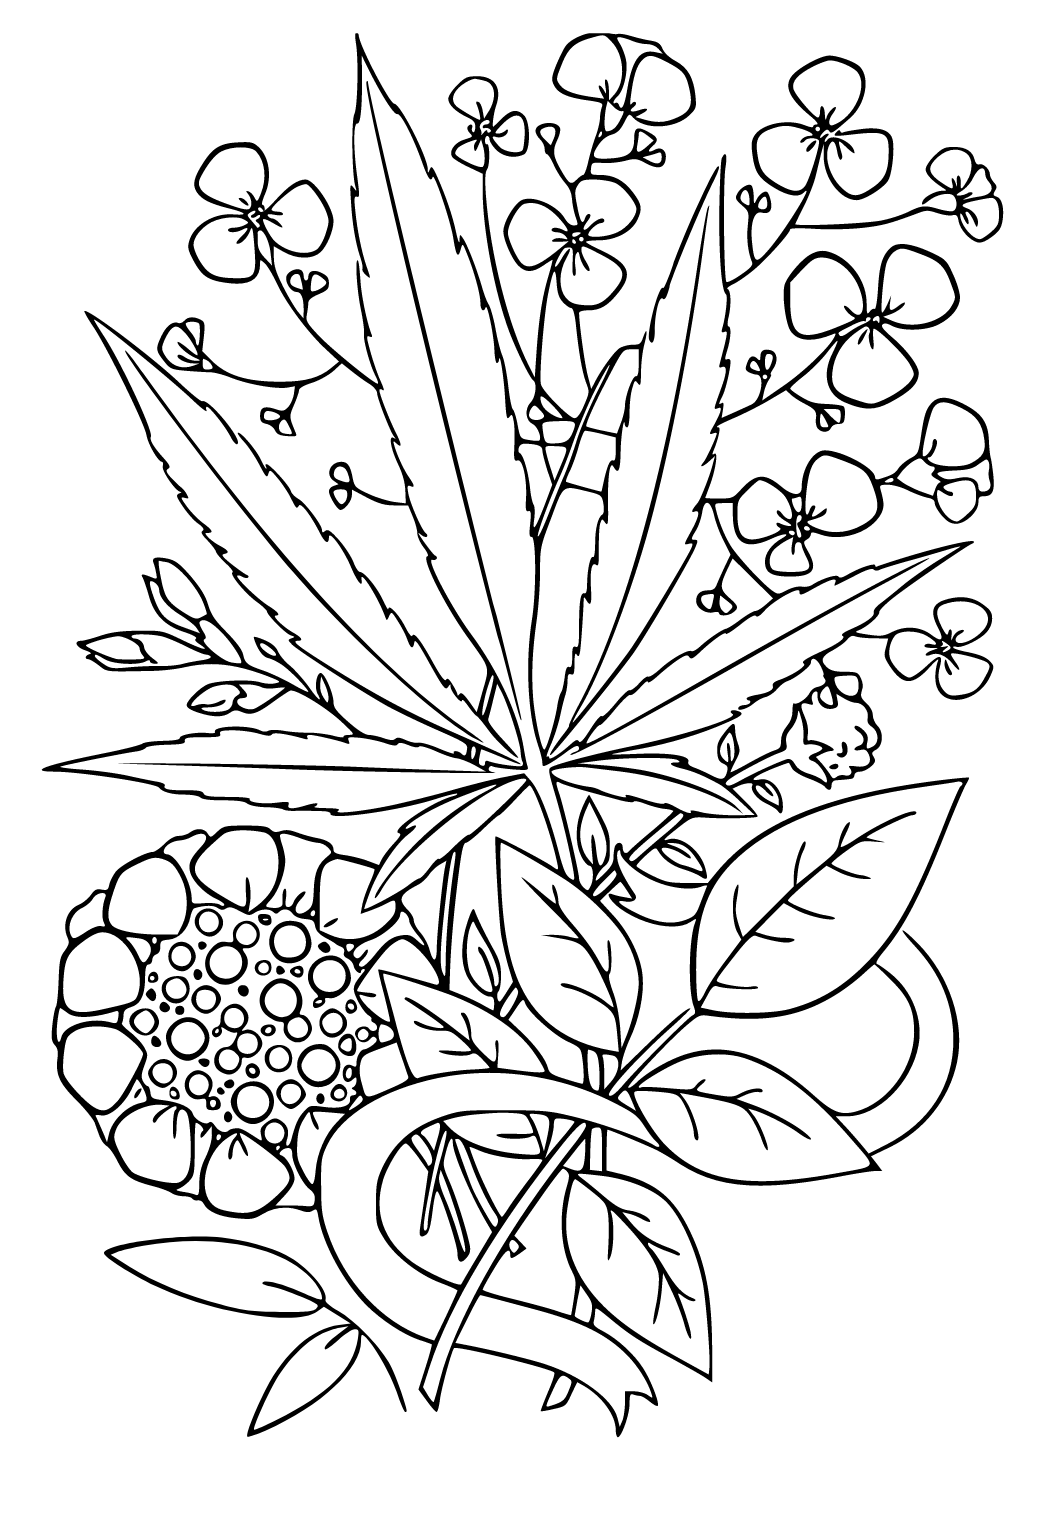 Free printable weed flowers coloring page for adults and kids